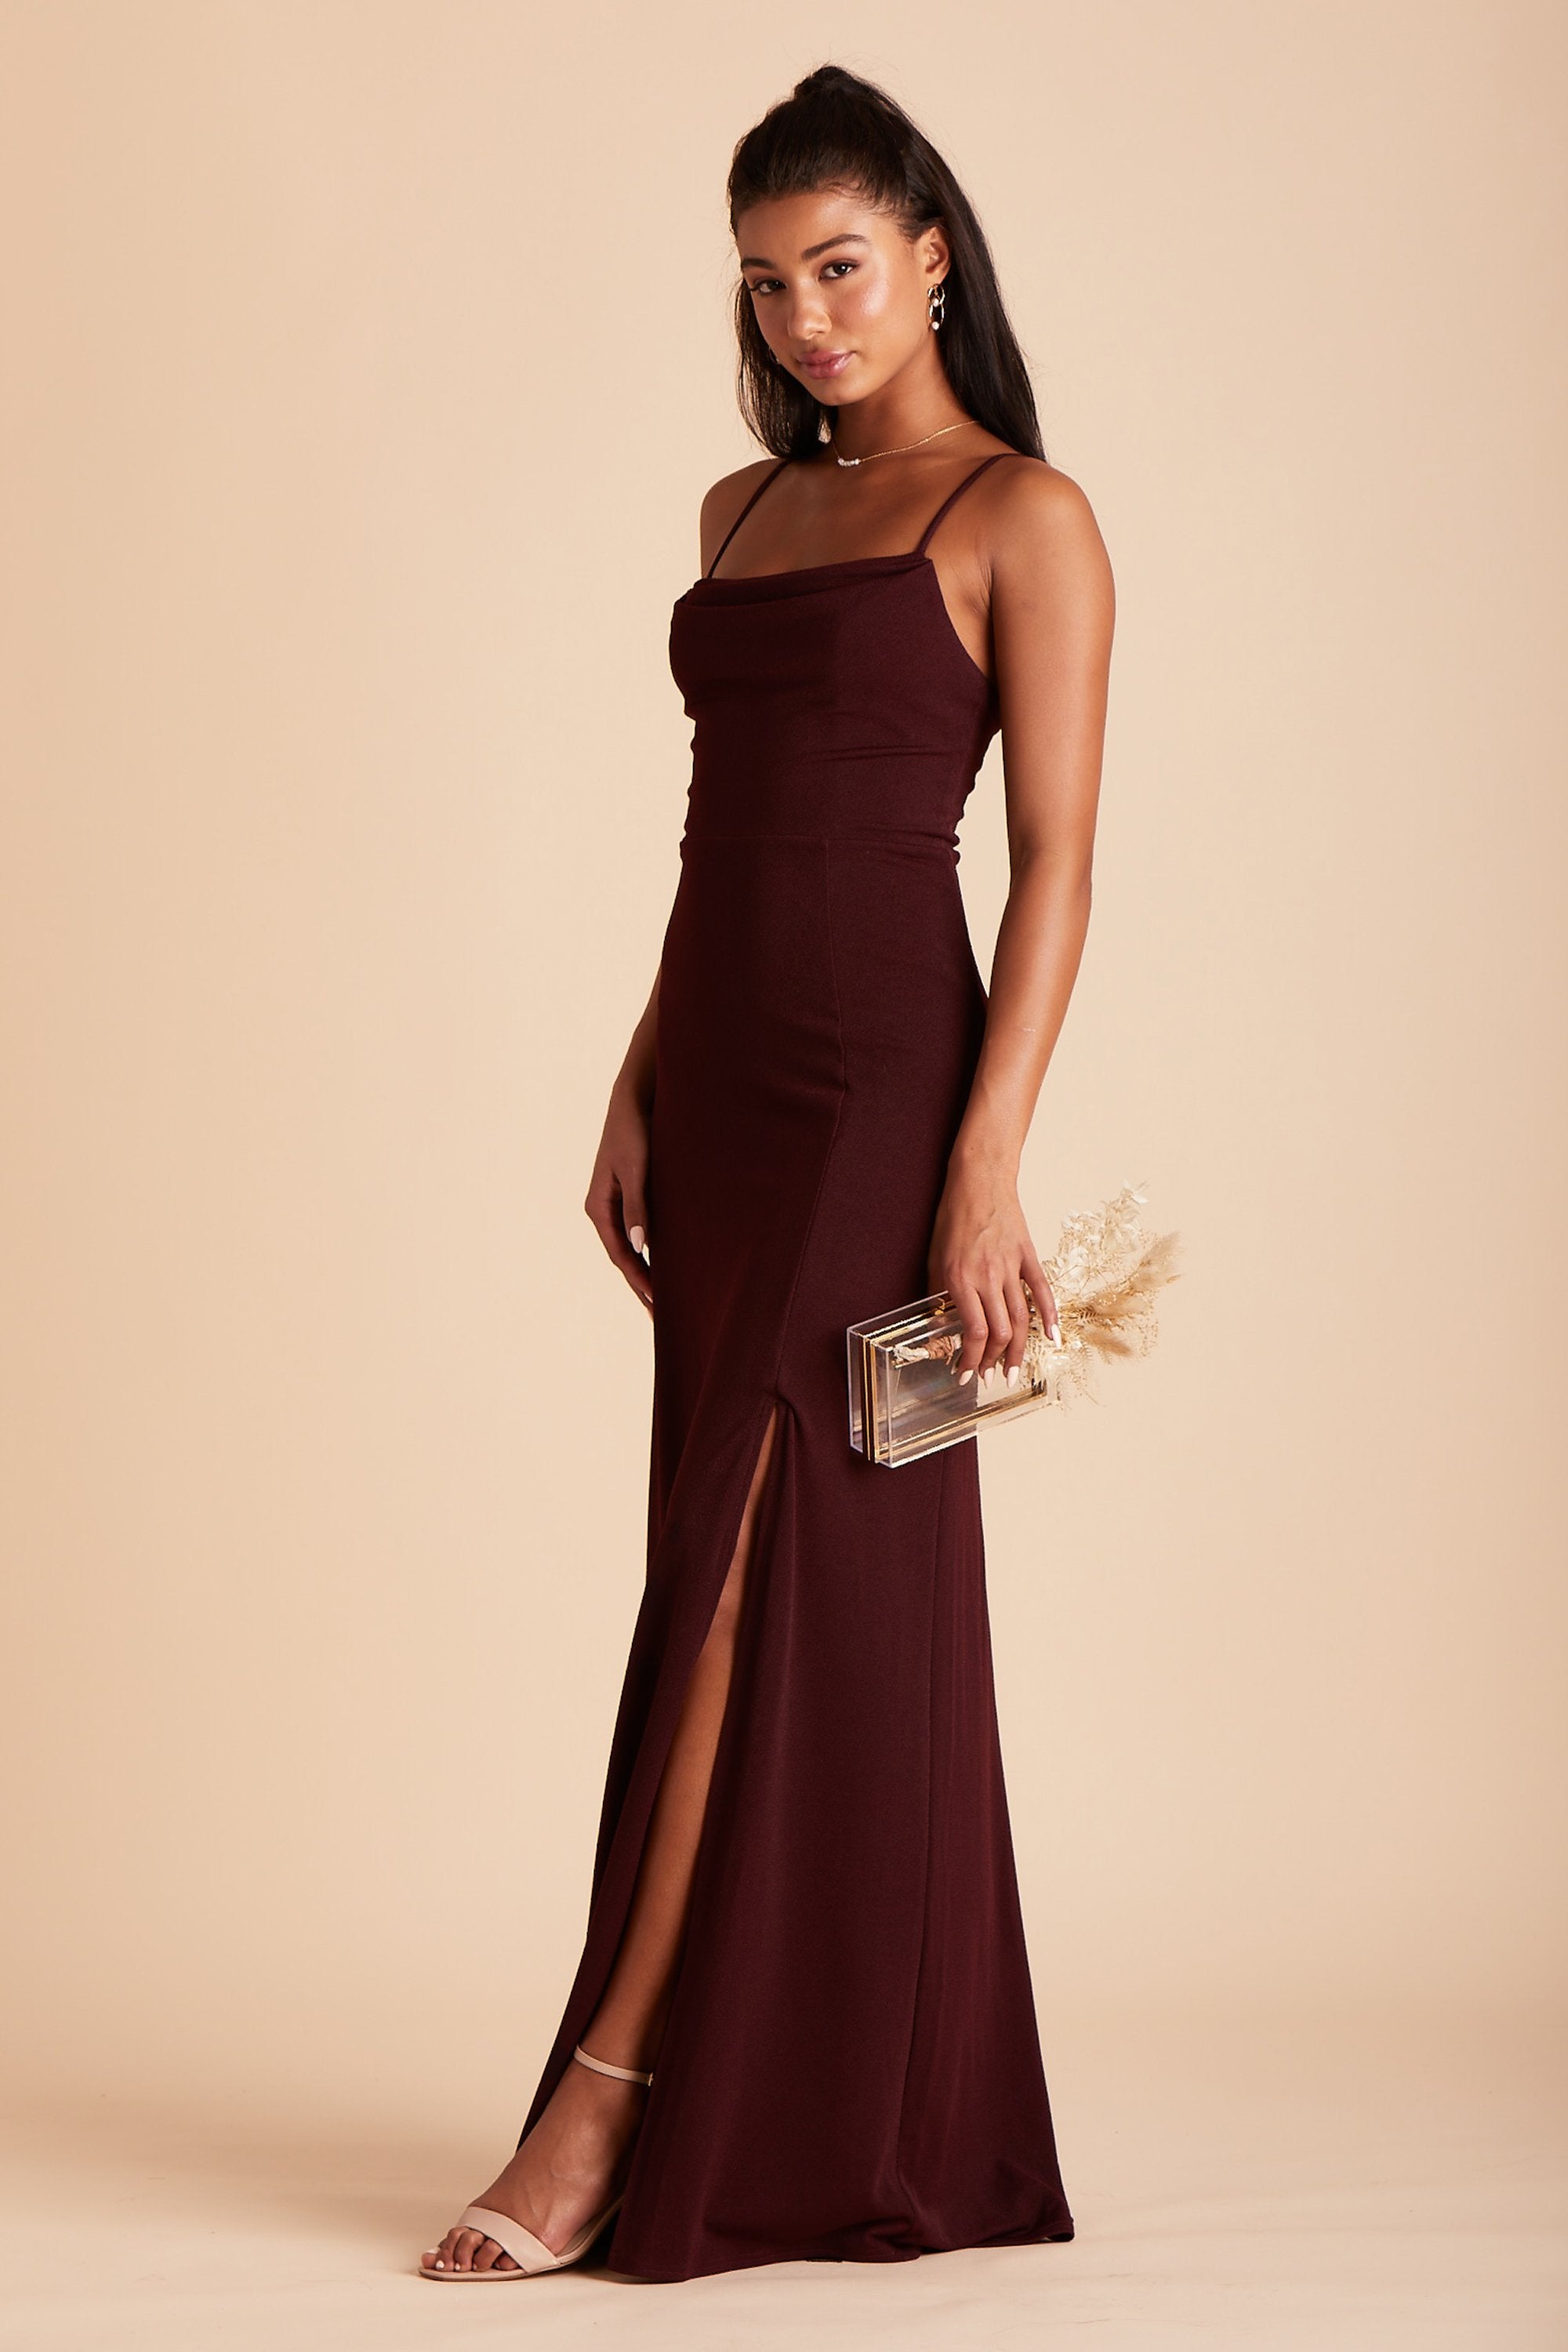 Ash bridesmaid dress with slit in cabernet burgundy crepe by Birdy Grey, side view